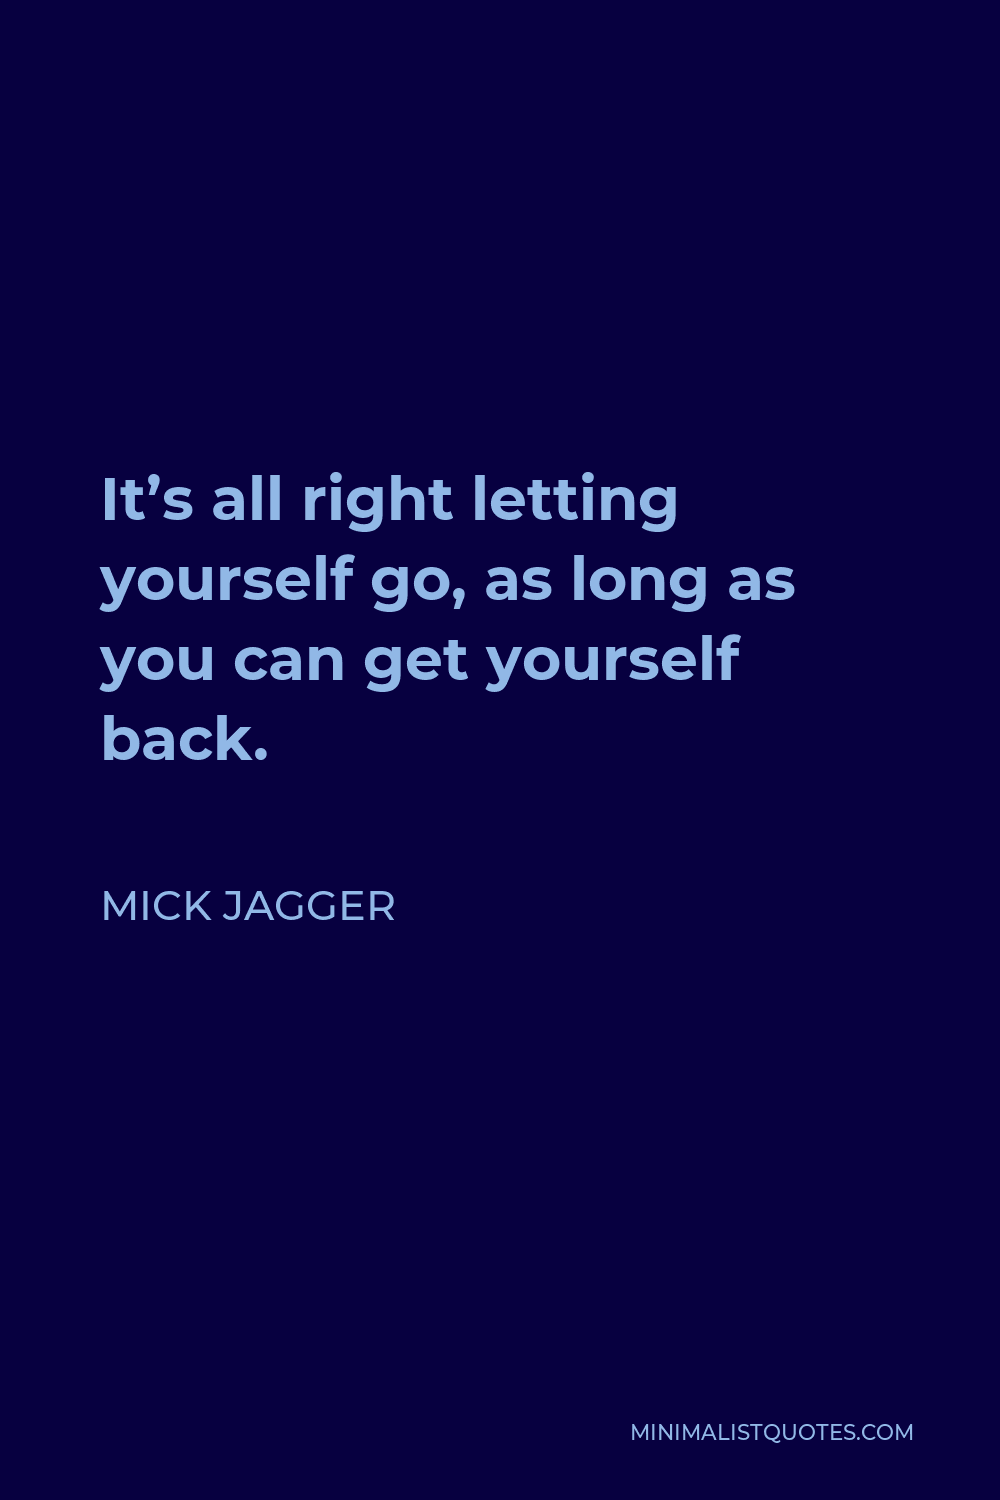 Mick Jagger Quote - It’s all right letting yourself go, as long as you can get yourself back.